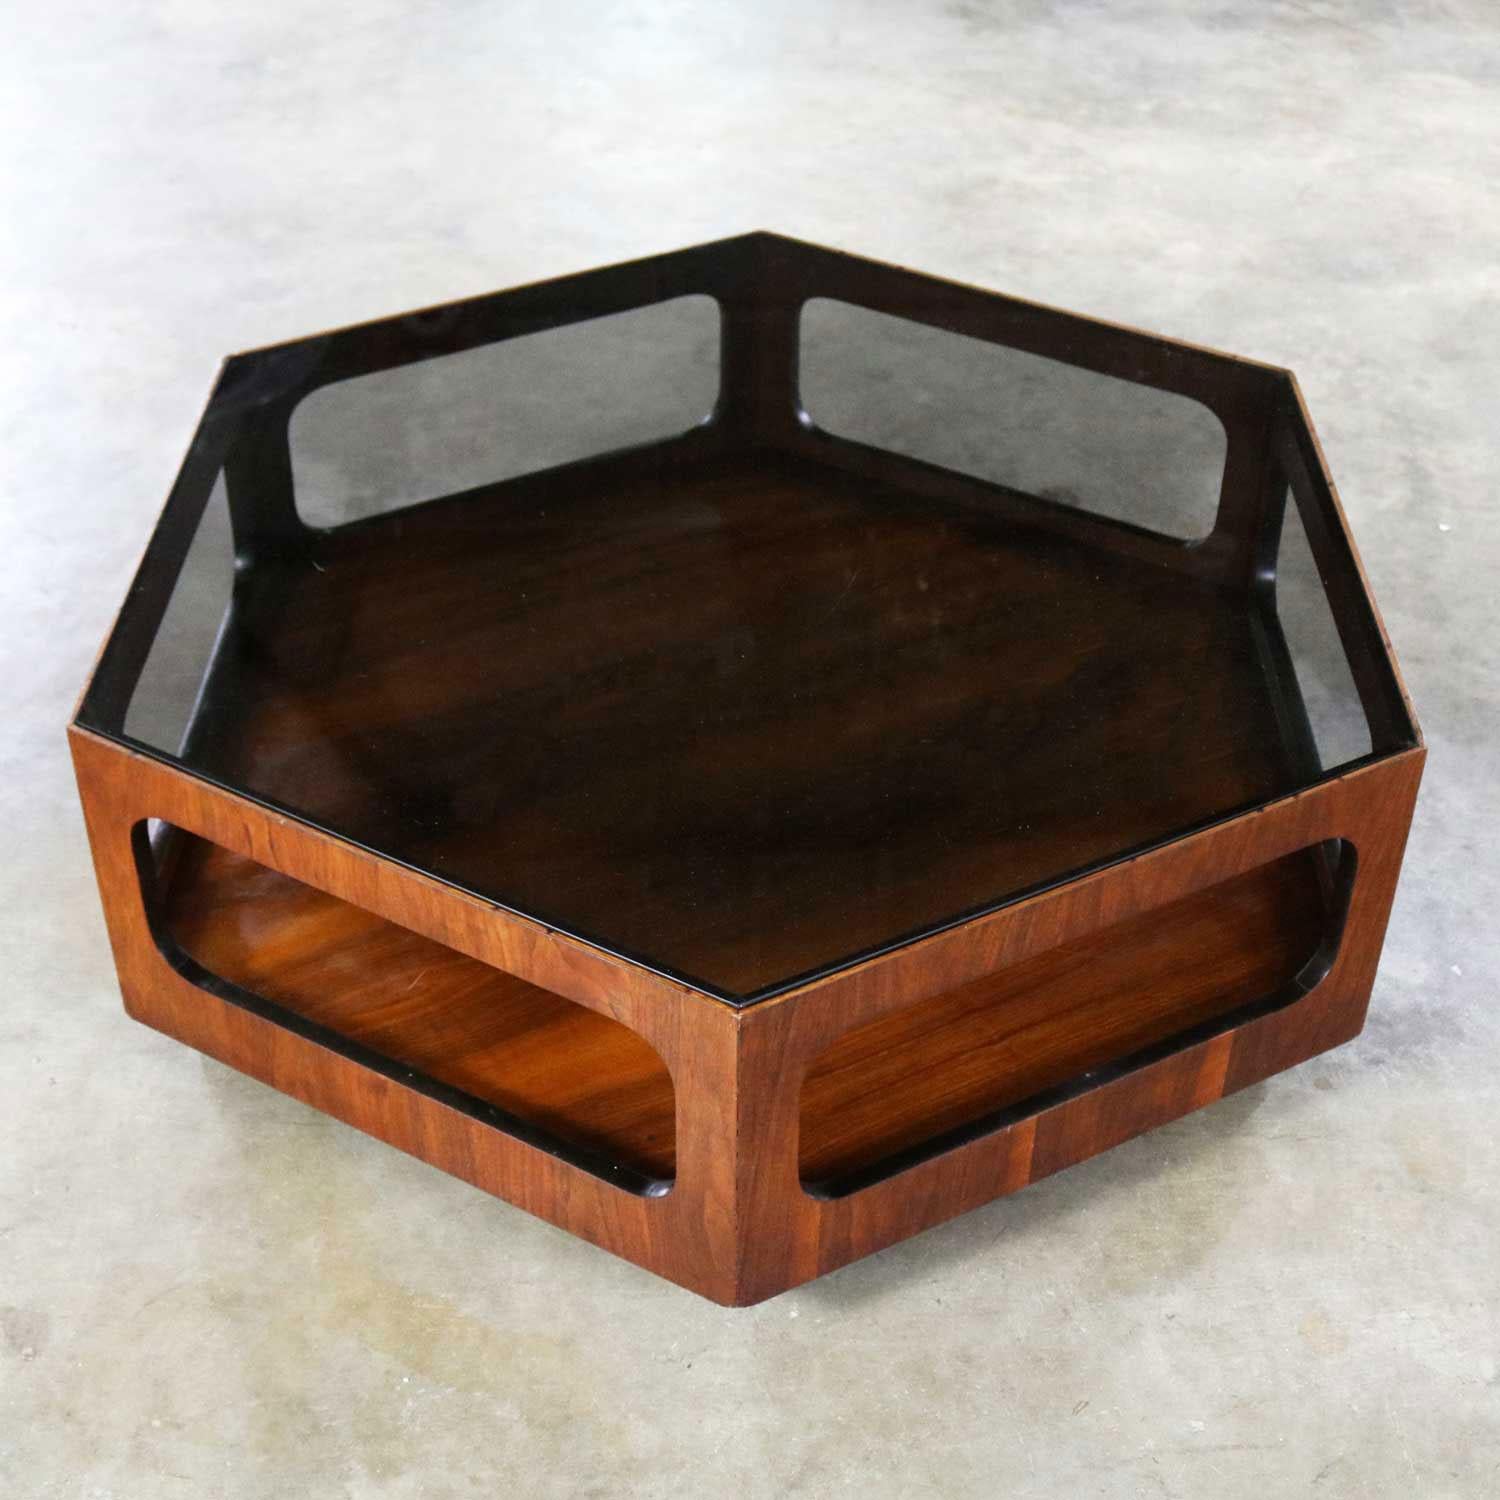 Amazing walnut and smoked glass hexagon coffee table by Lane Alta Vista. This table is marked with the Style No. 1121 04 and its serial no. of 4172120, which dates it to February 12, 1971. It is in wonderful vintage condition. It does have small